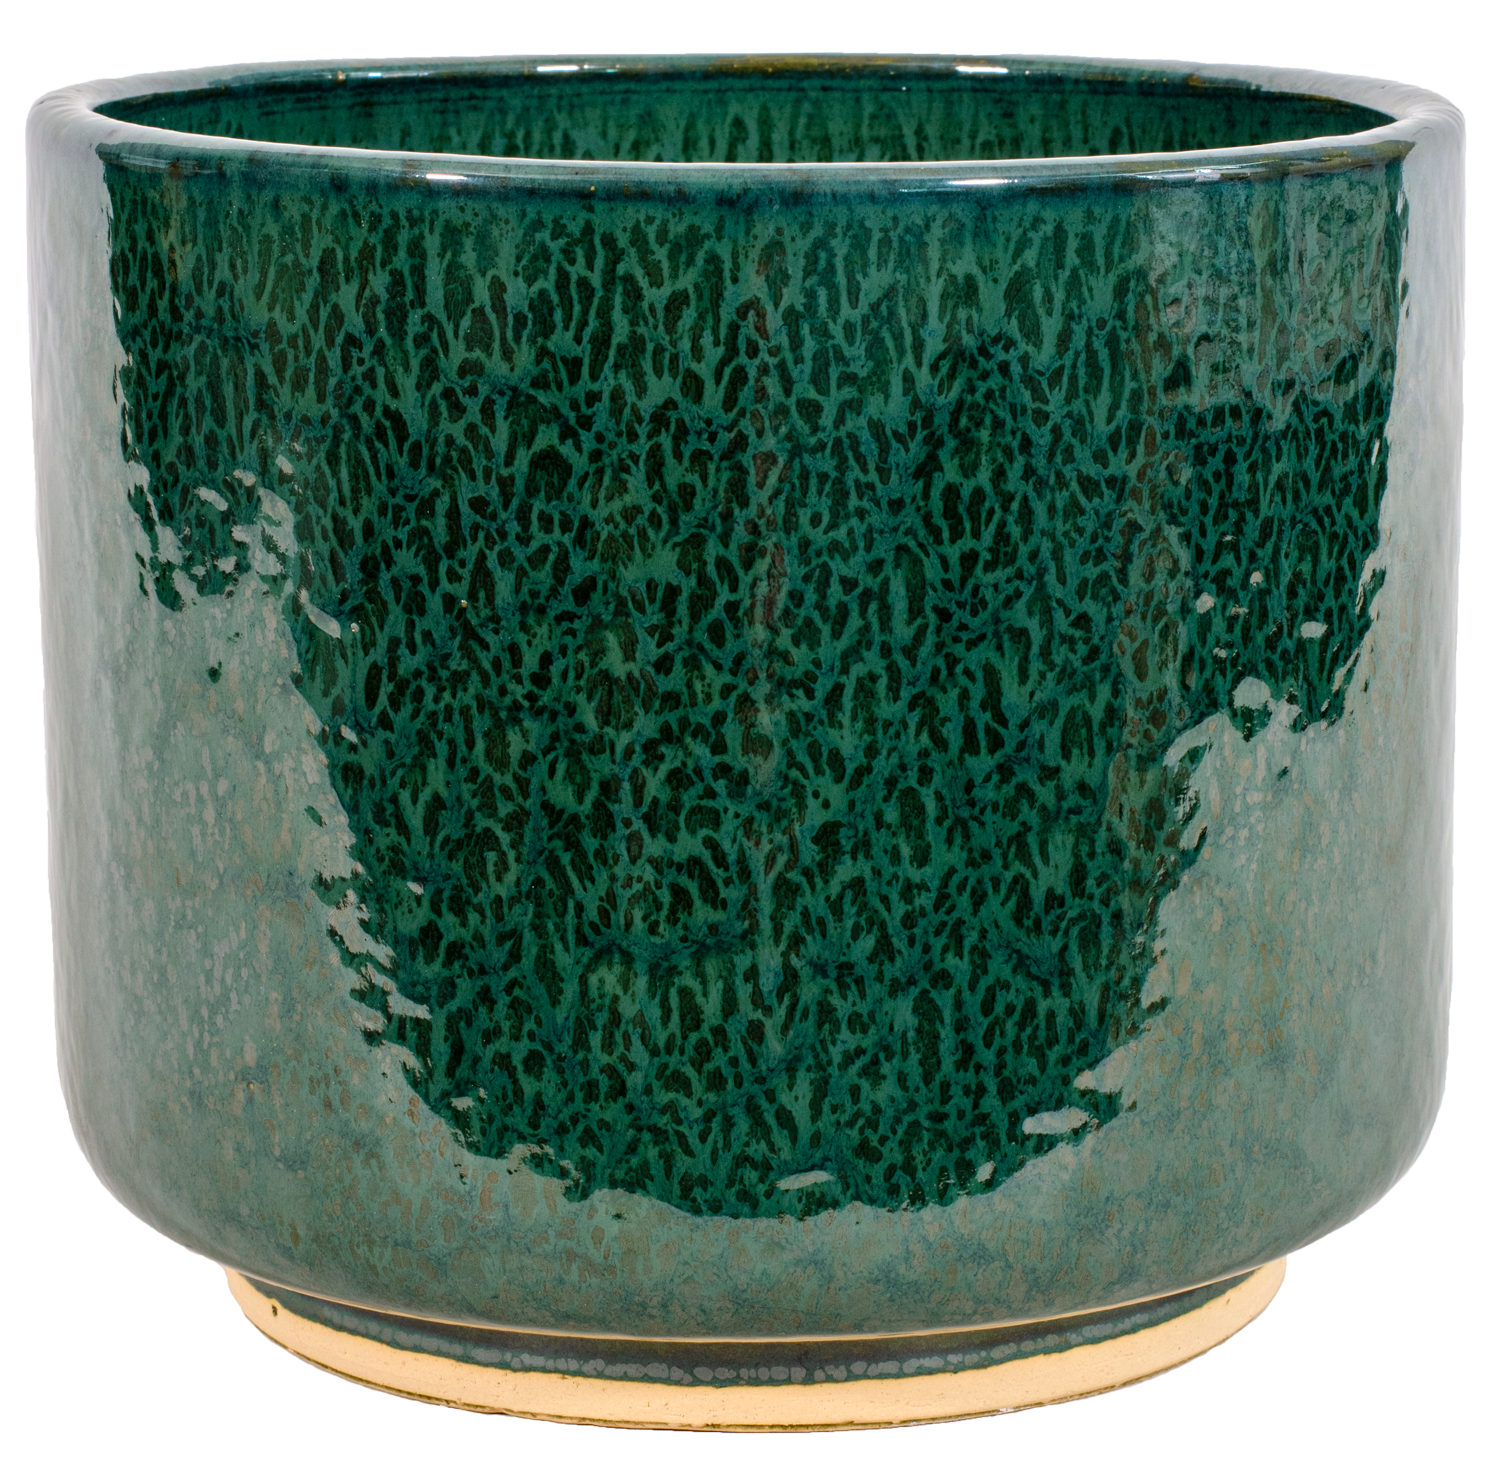 medium green ceramic cylinder planter in a modern style with small pedestal foot